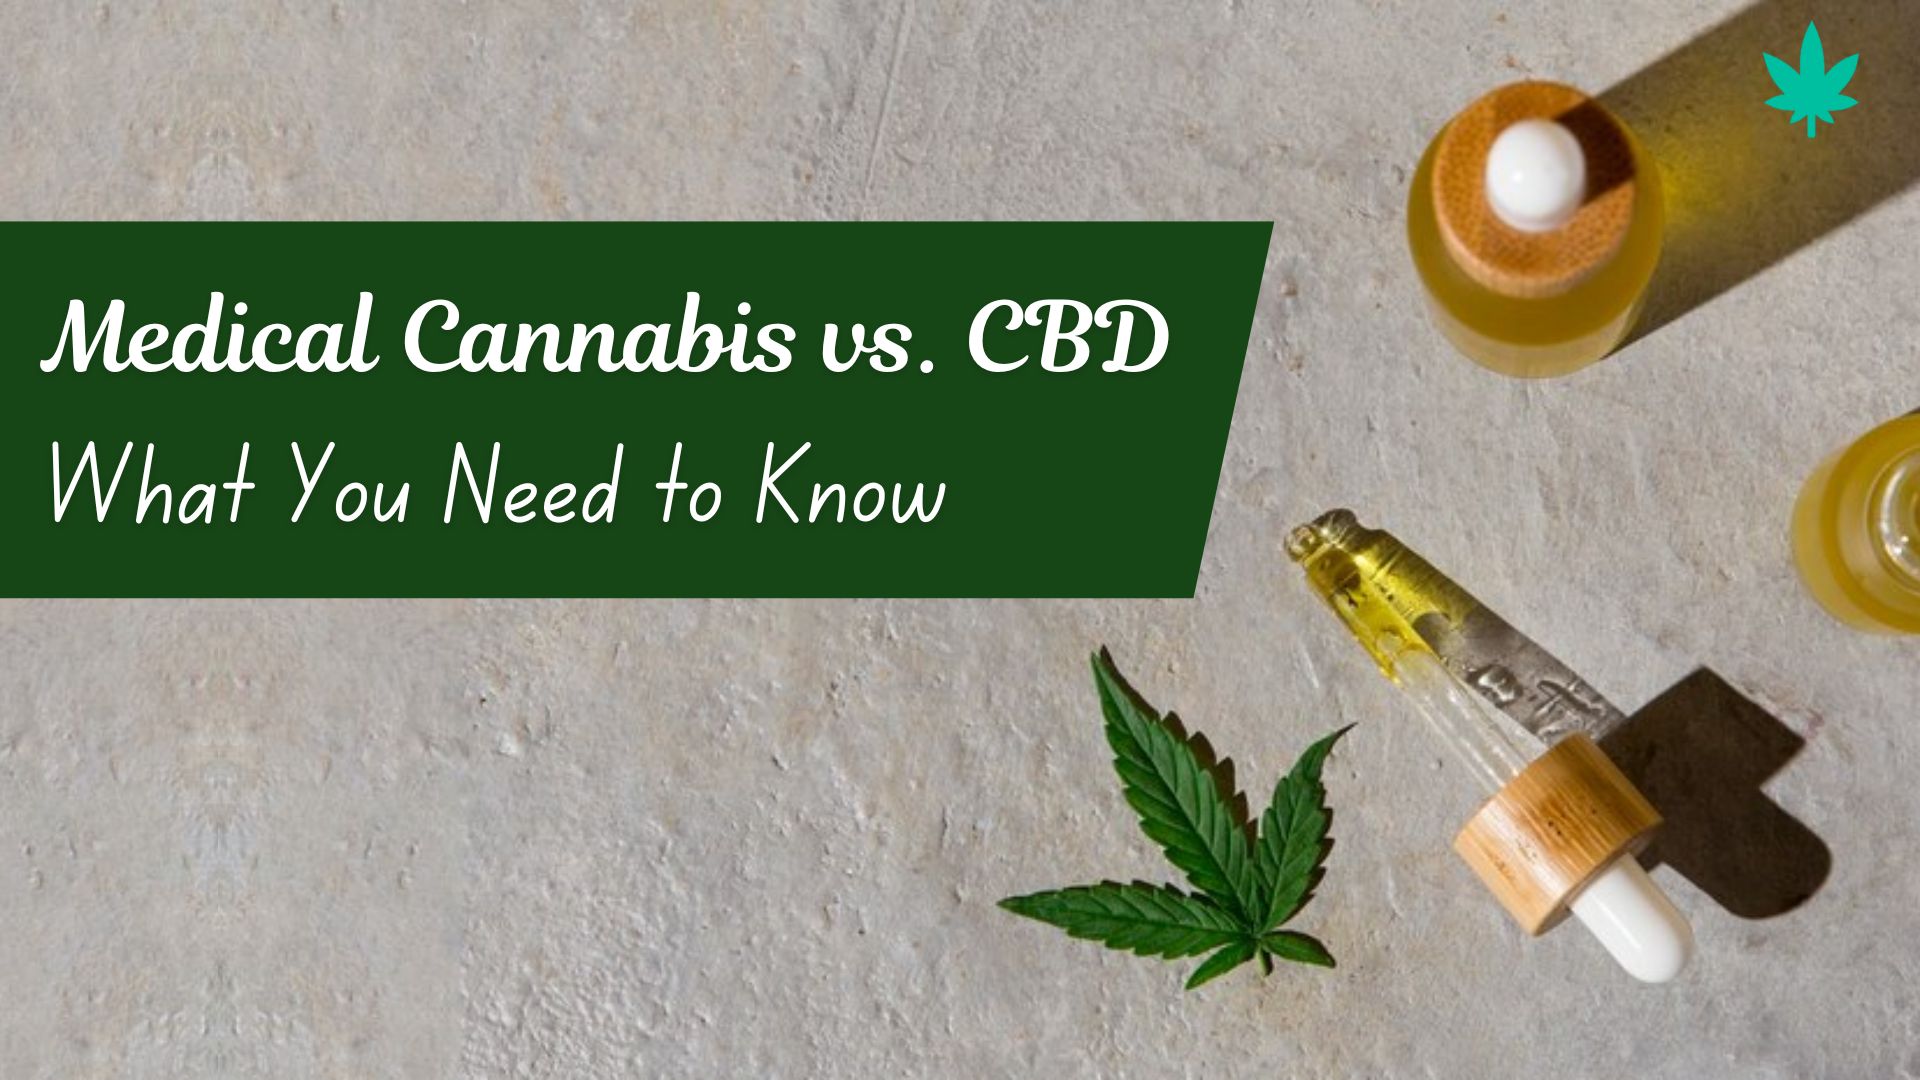 Medical Cannabis vs. CBD: What You Need to Know